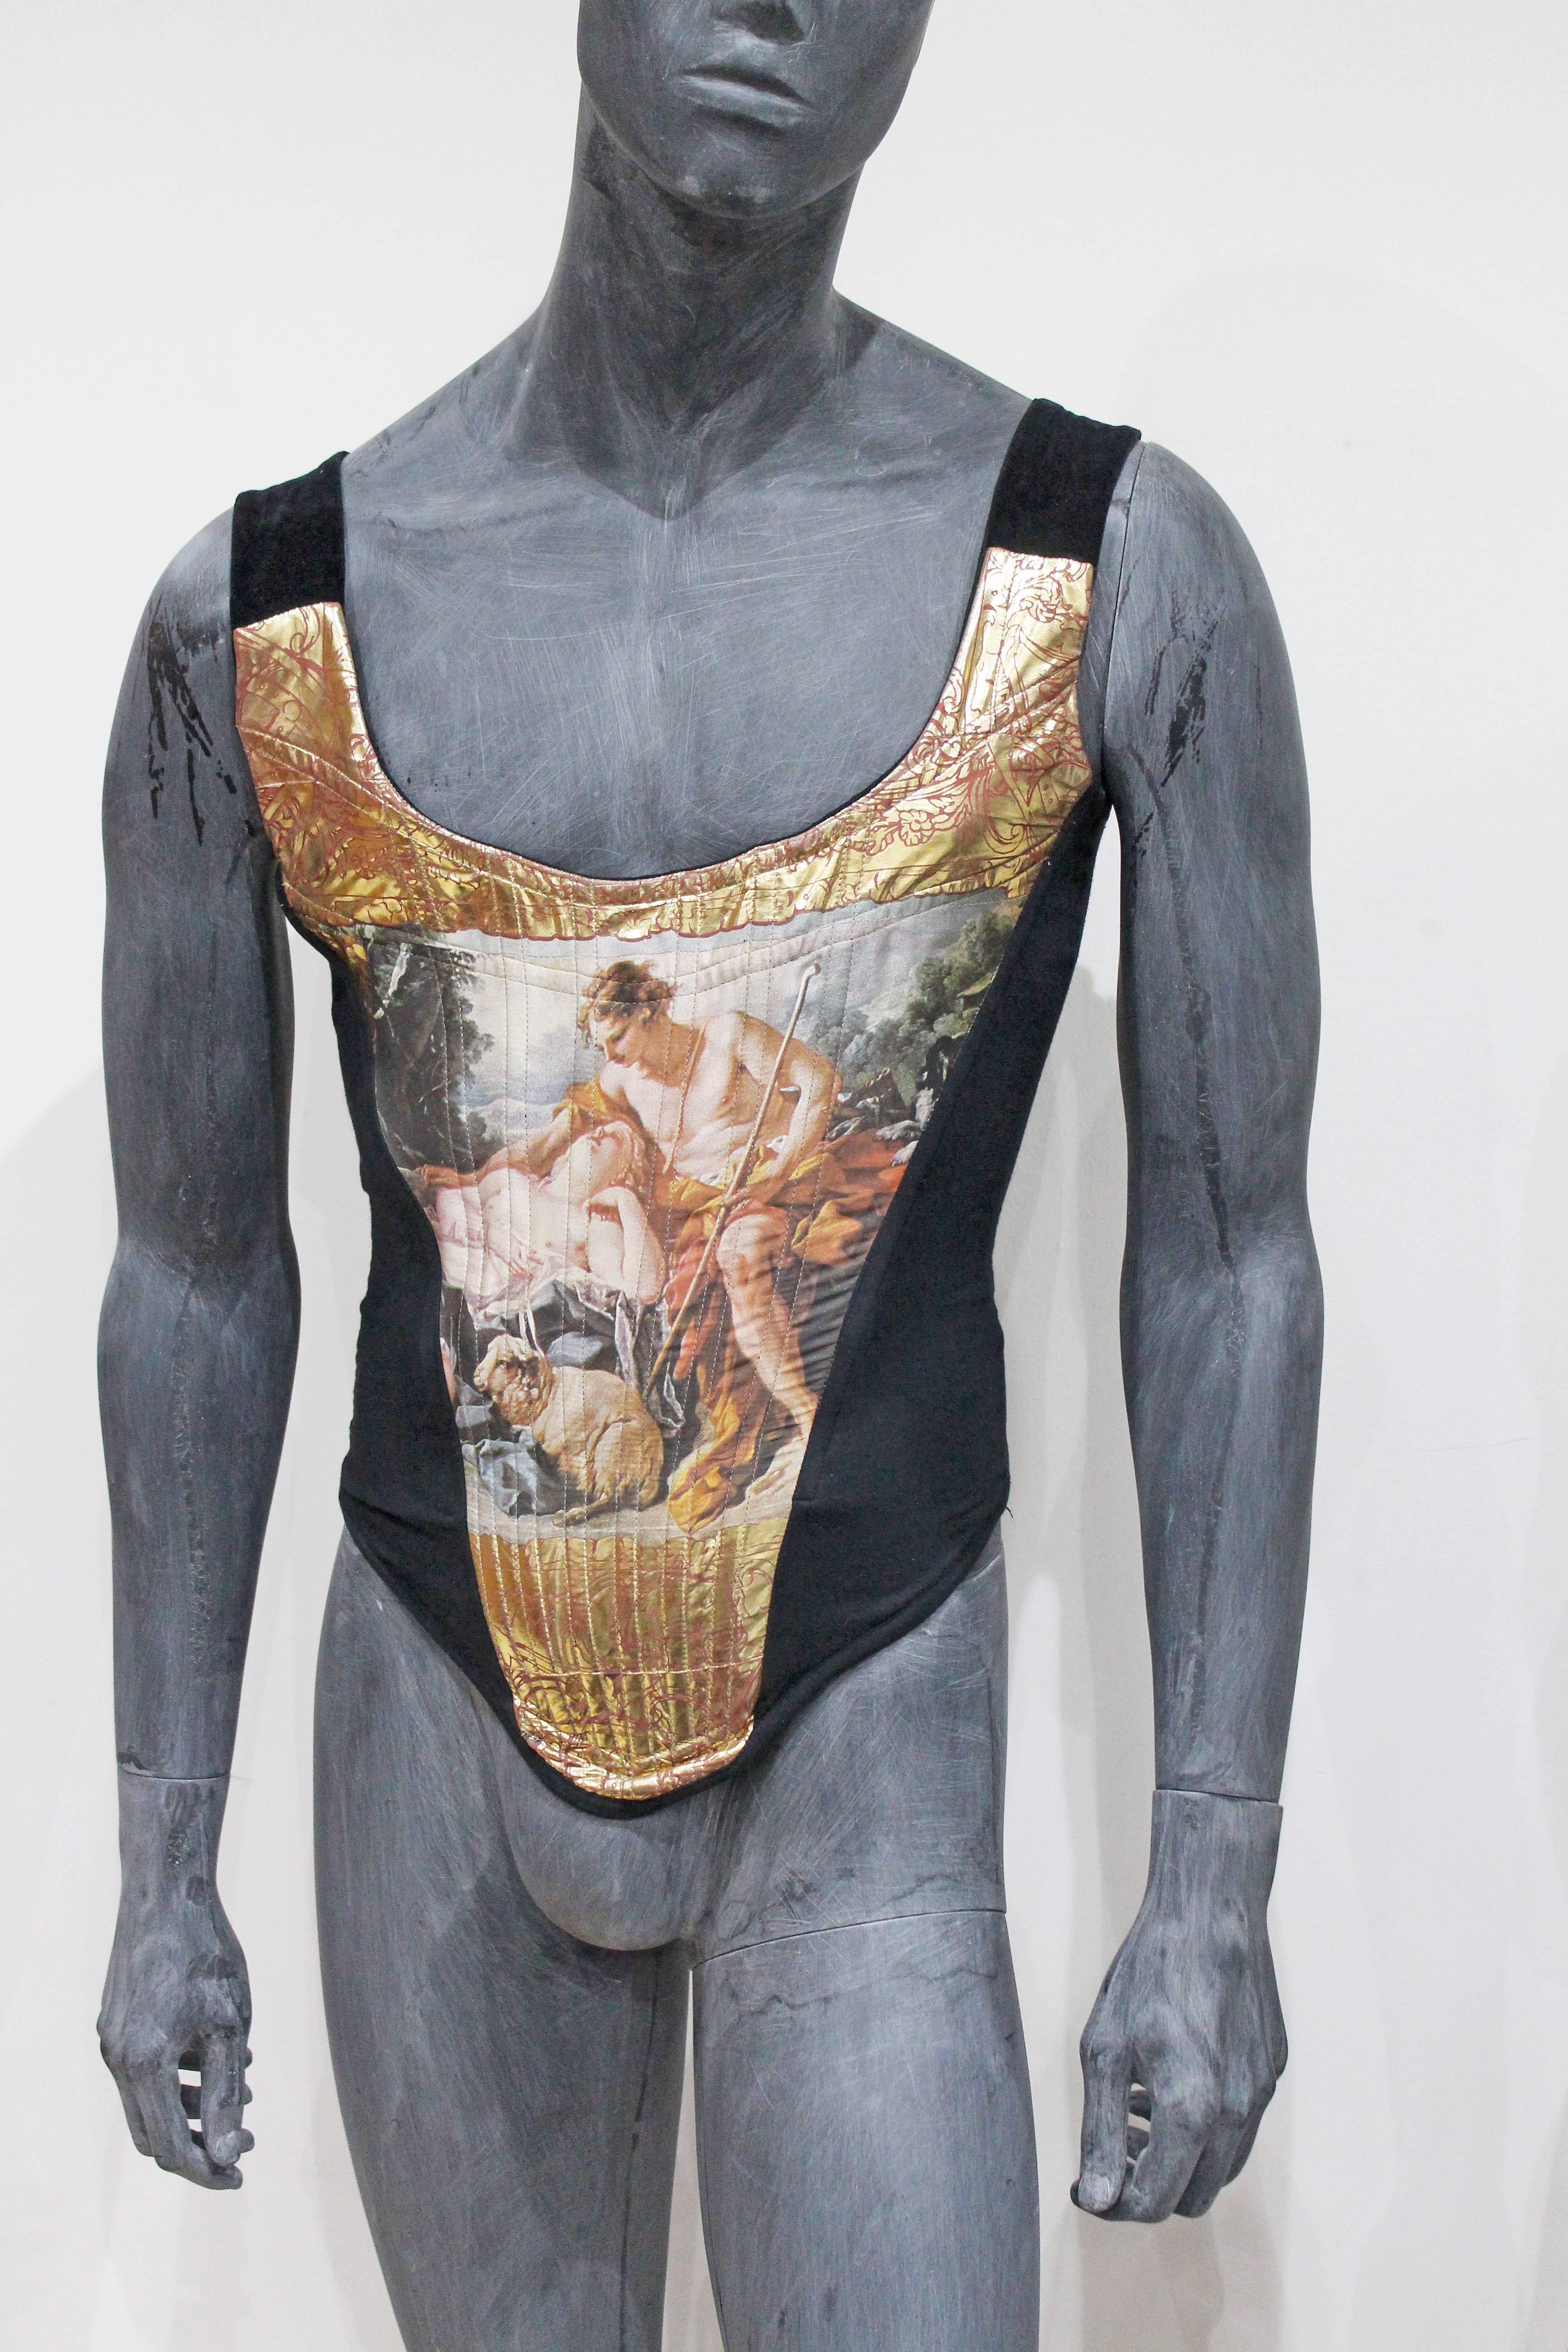 Very rare and highly collectible Mens Vivienne Westwood corset of synthetic blend with a depiction of François Boucher's painting of Daphnis and Chloe printed on front panel. Features classical motifs printed in gold and mauve and corset sides are